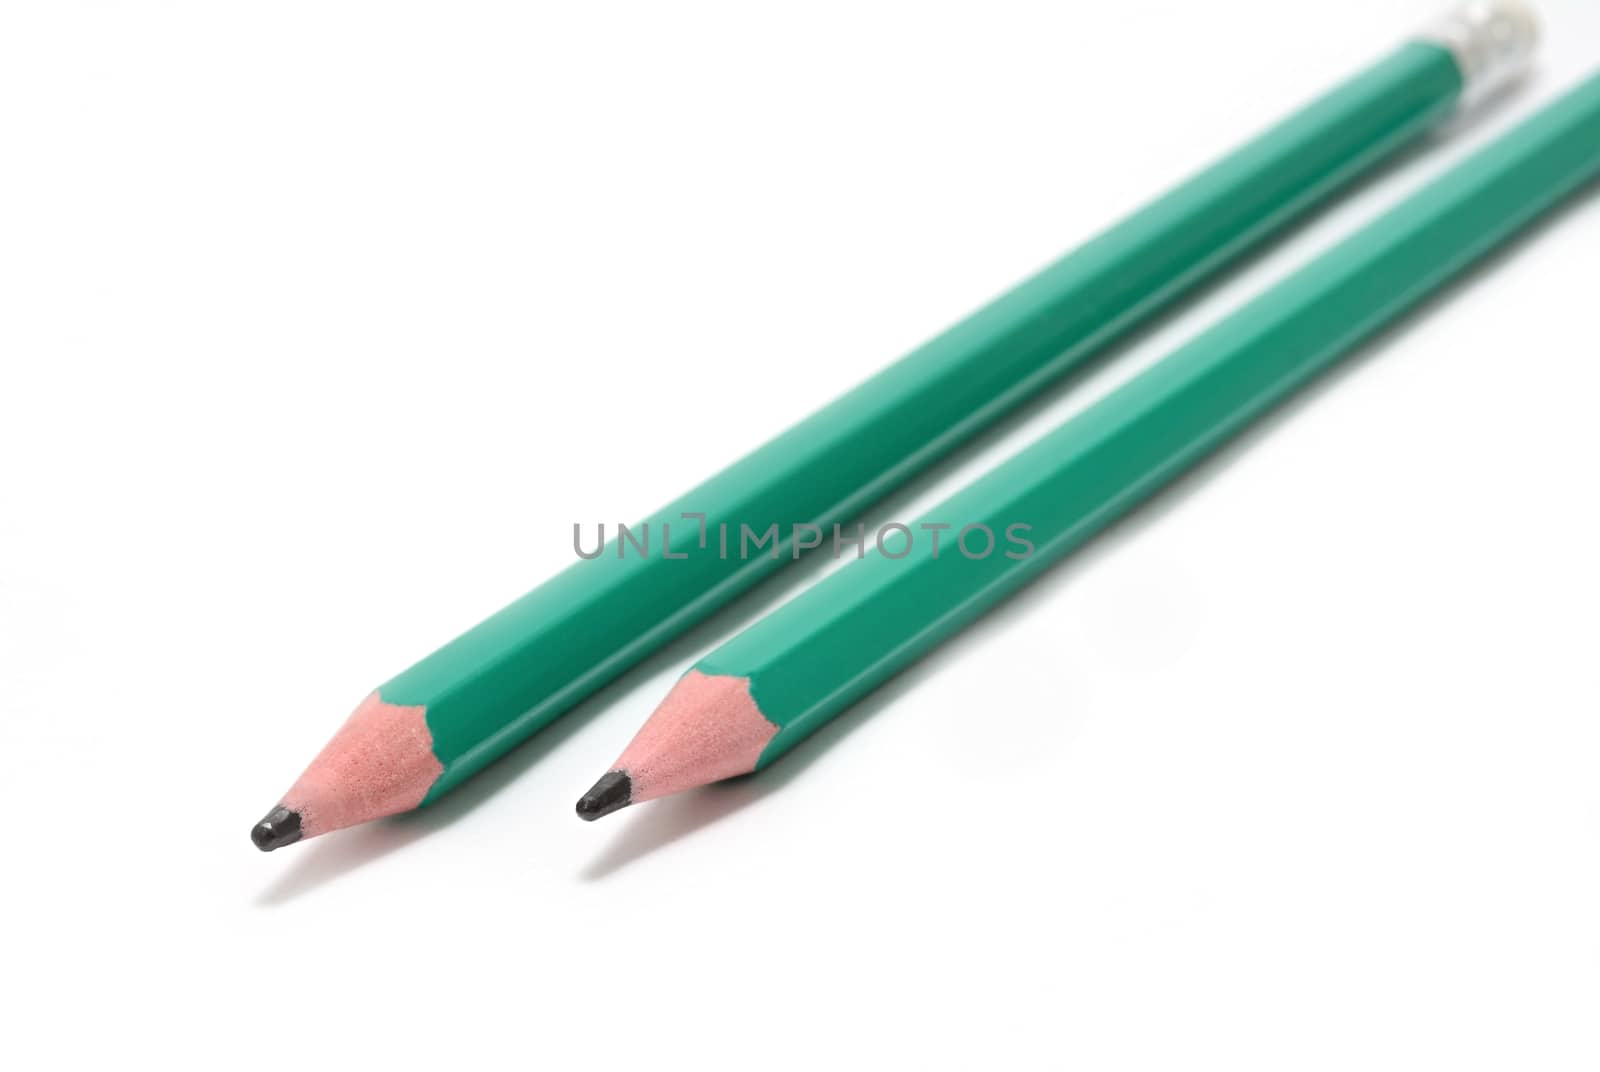 Pencils on white background by hamik